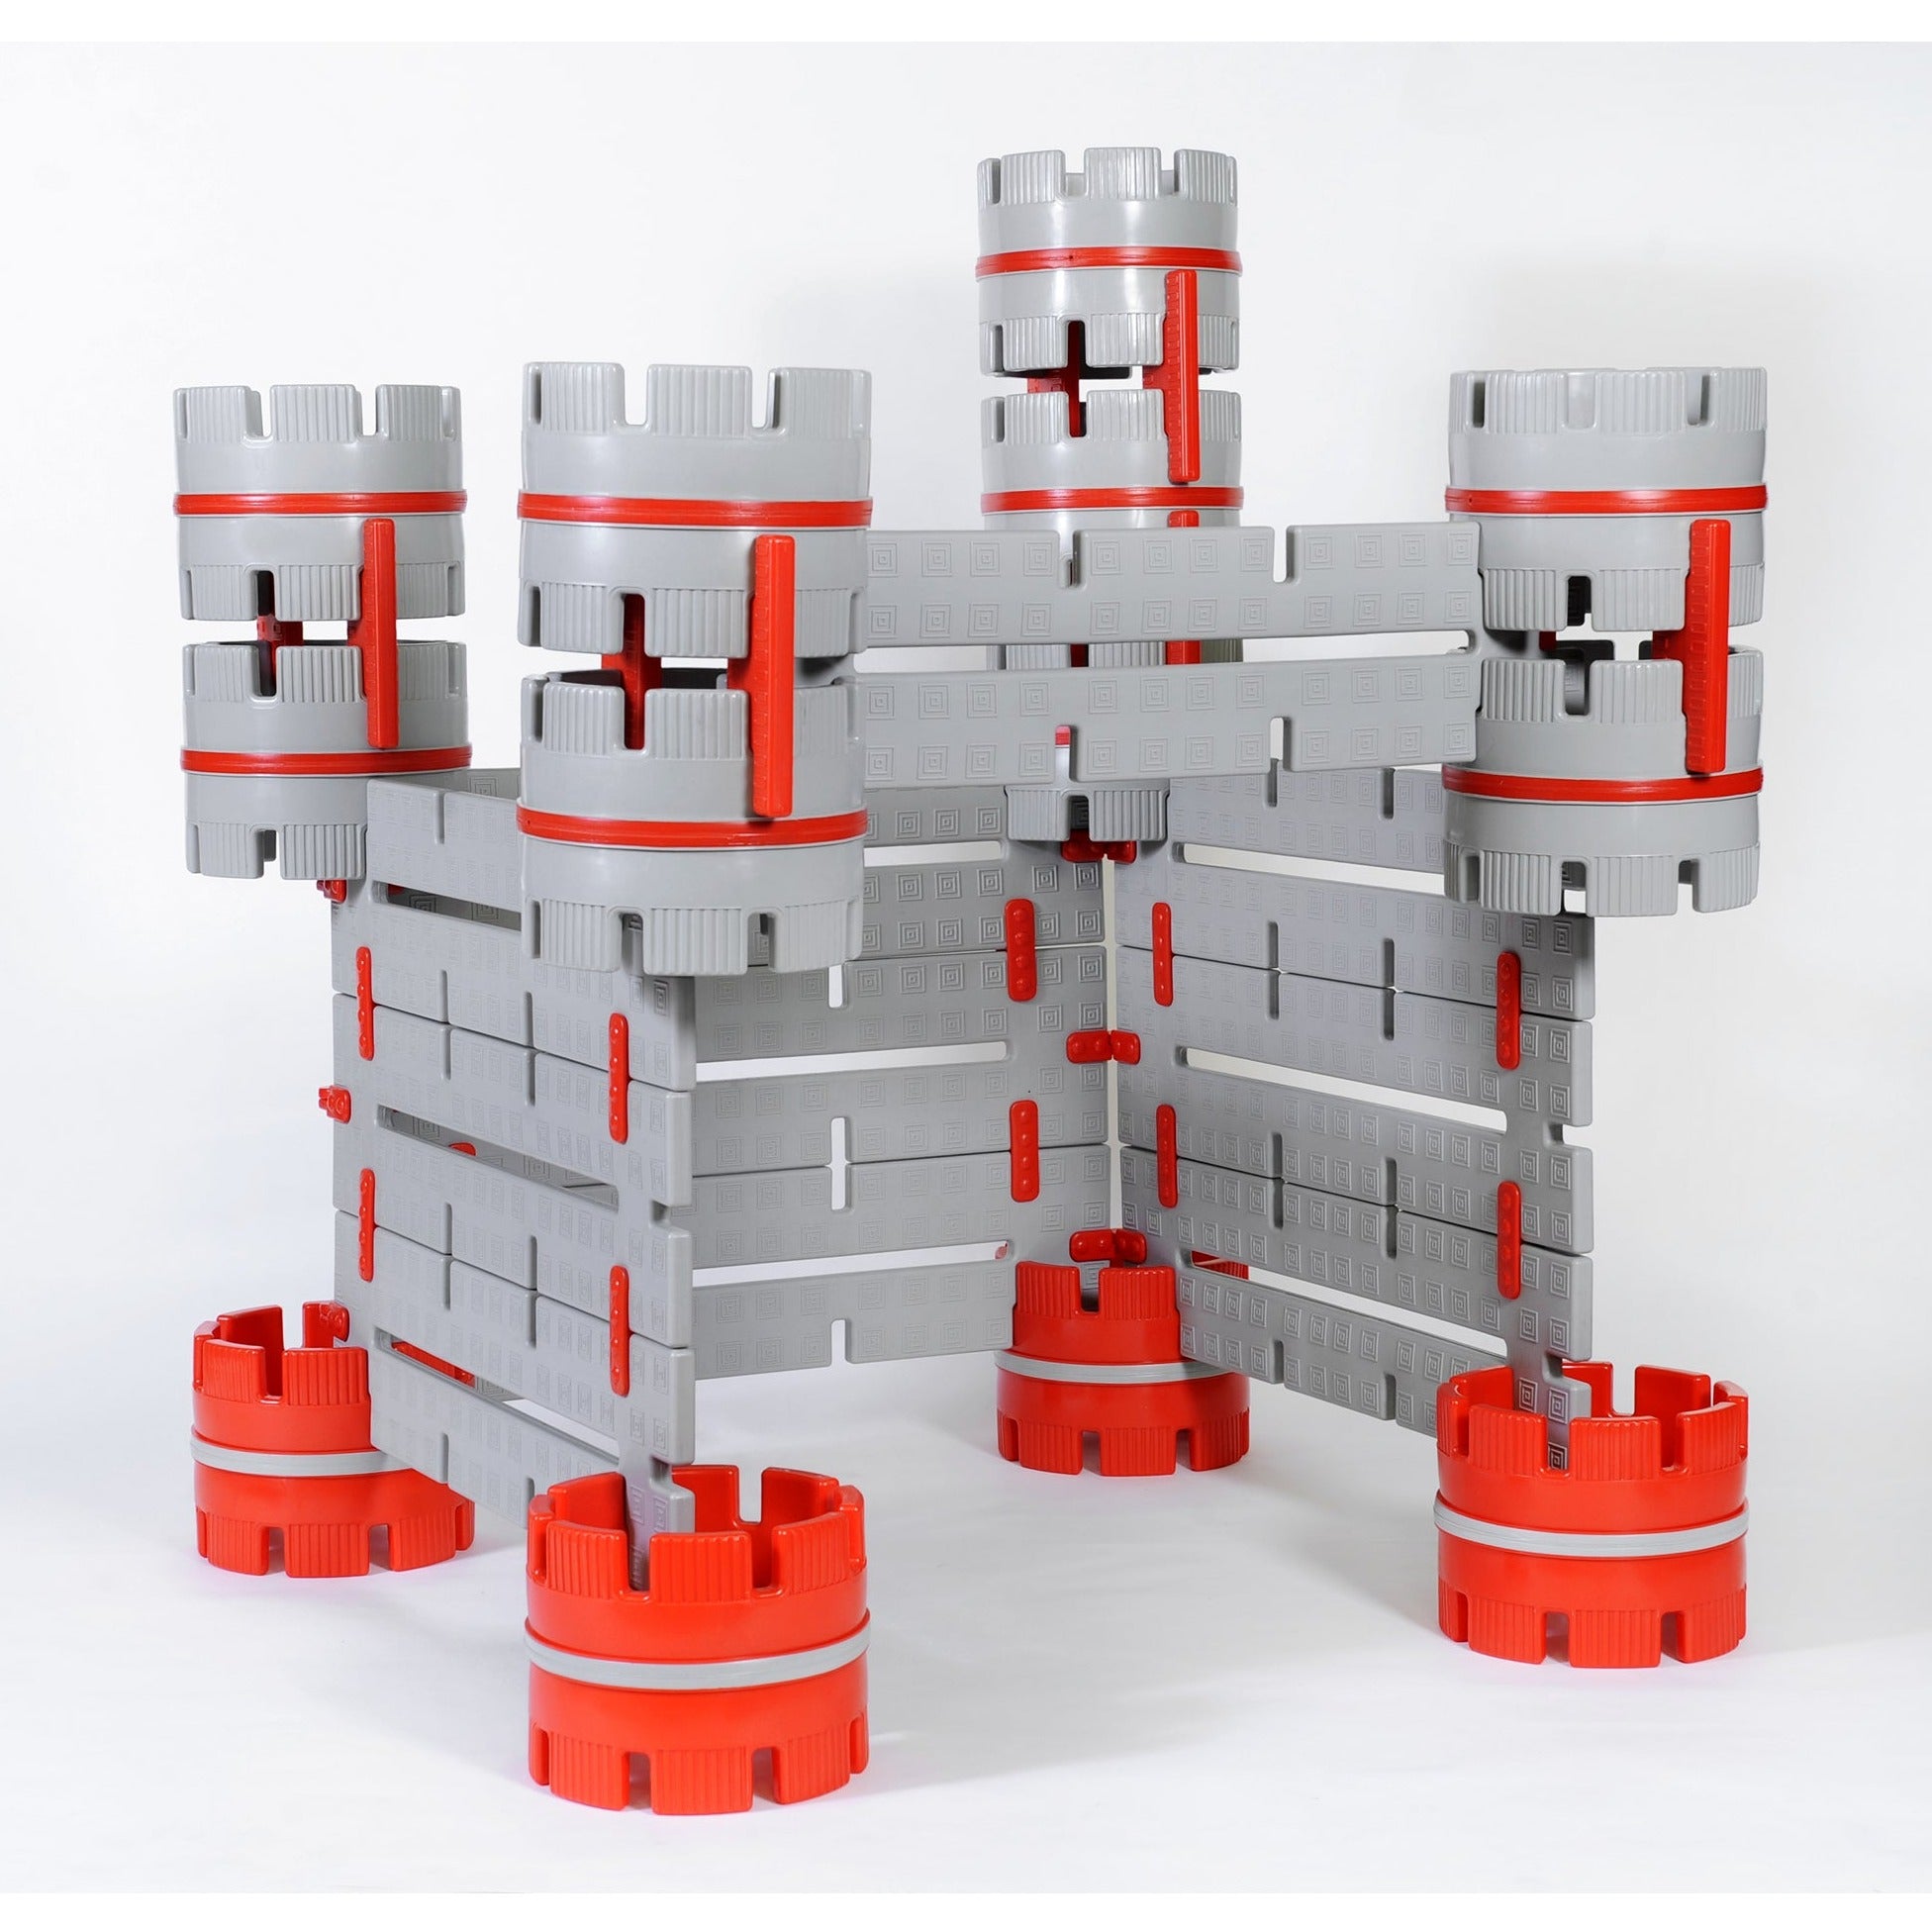 Constructa Castle, Unleash your child's imagination with the Constructa Castle construction set! This versatile kit allows young builders to create their very own castles and fortresses, providing endless hours of creative play and developmental benefits. Constructa CastleFeatures: 🏰 54 Bright Coloured Piec es: This Constructa Castle set includes a variety of components such as 16 turrets, 10 large connectors, 10 beams, 12 connectors, and 6 flexi connectors. The vivid colors are not only eye-catching but al